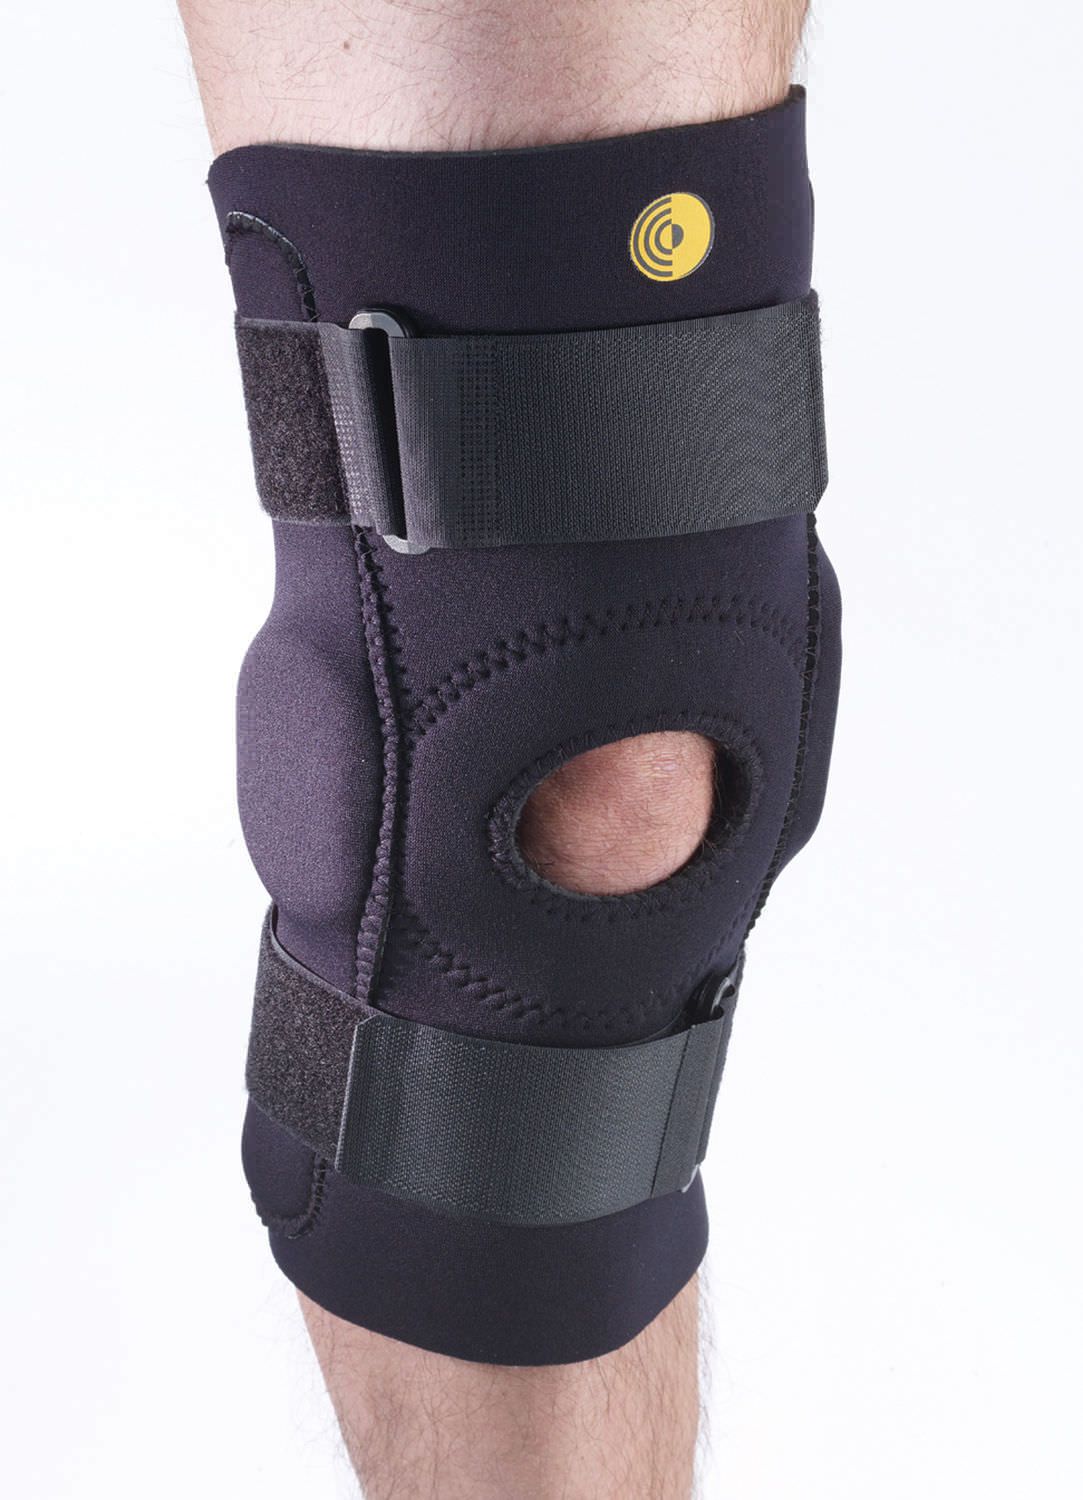 Knee orthosis (orthopedic immobilization) / with patellar buttress / articulated 88-0375 Corflex